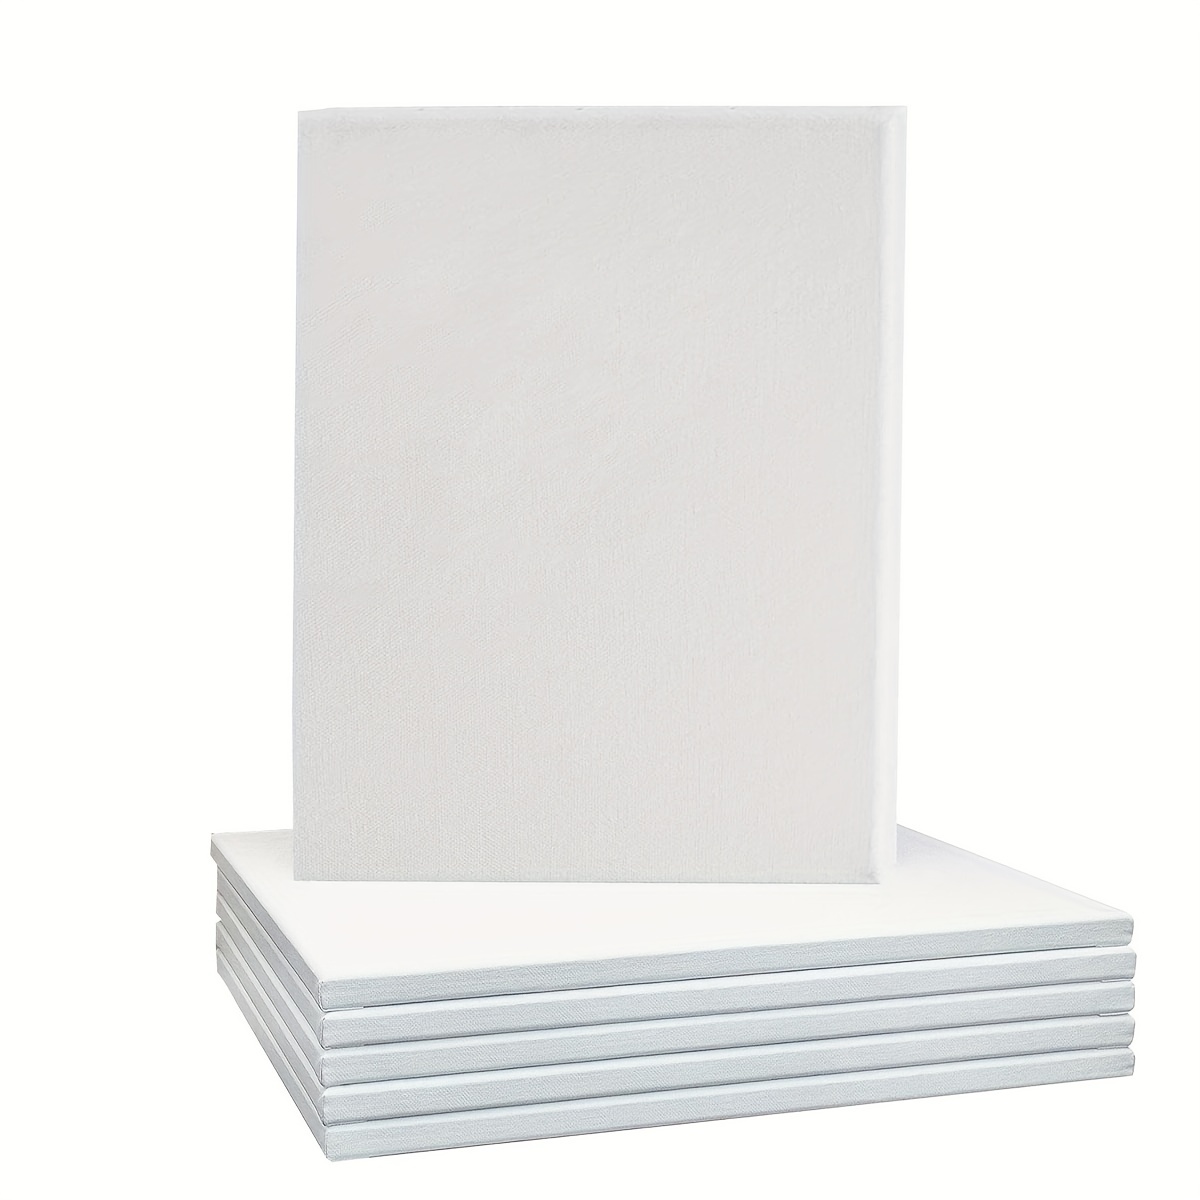 6pcs Paint Canvases For Painting,12 X 16 Inches/ 30 X 40 Cm, Blank White  Stretched Canvas Bulk, 8 Oz Gesso-Primed, Art Supplies For Adults And Teens